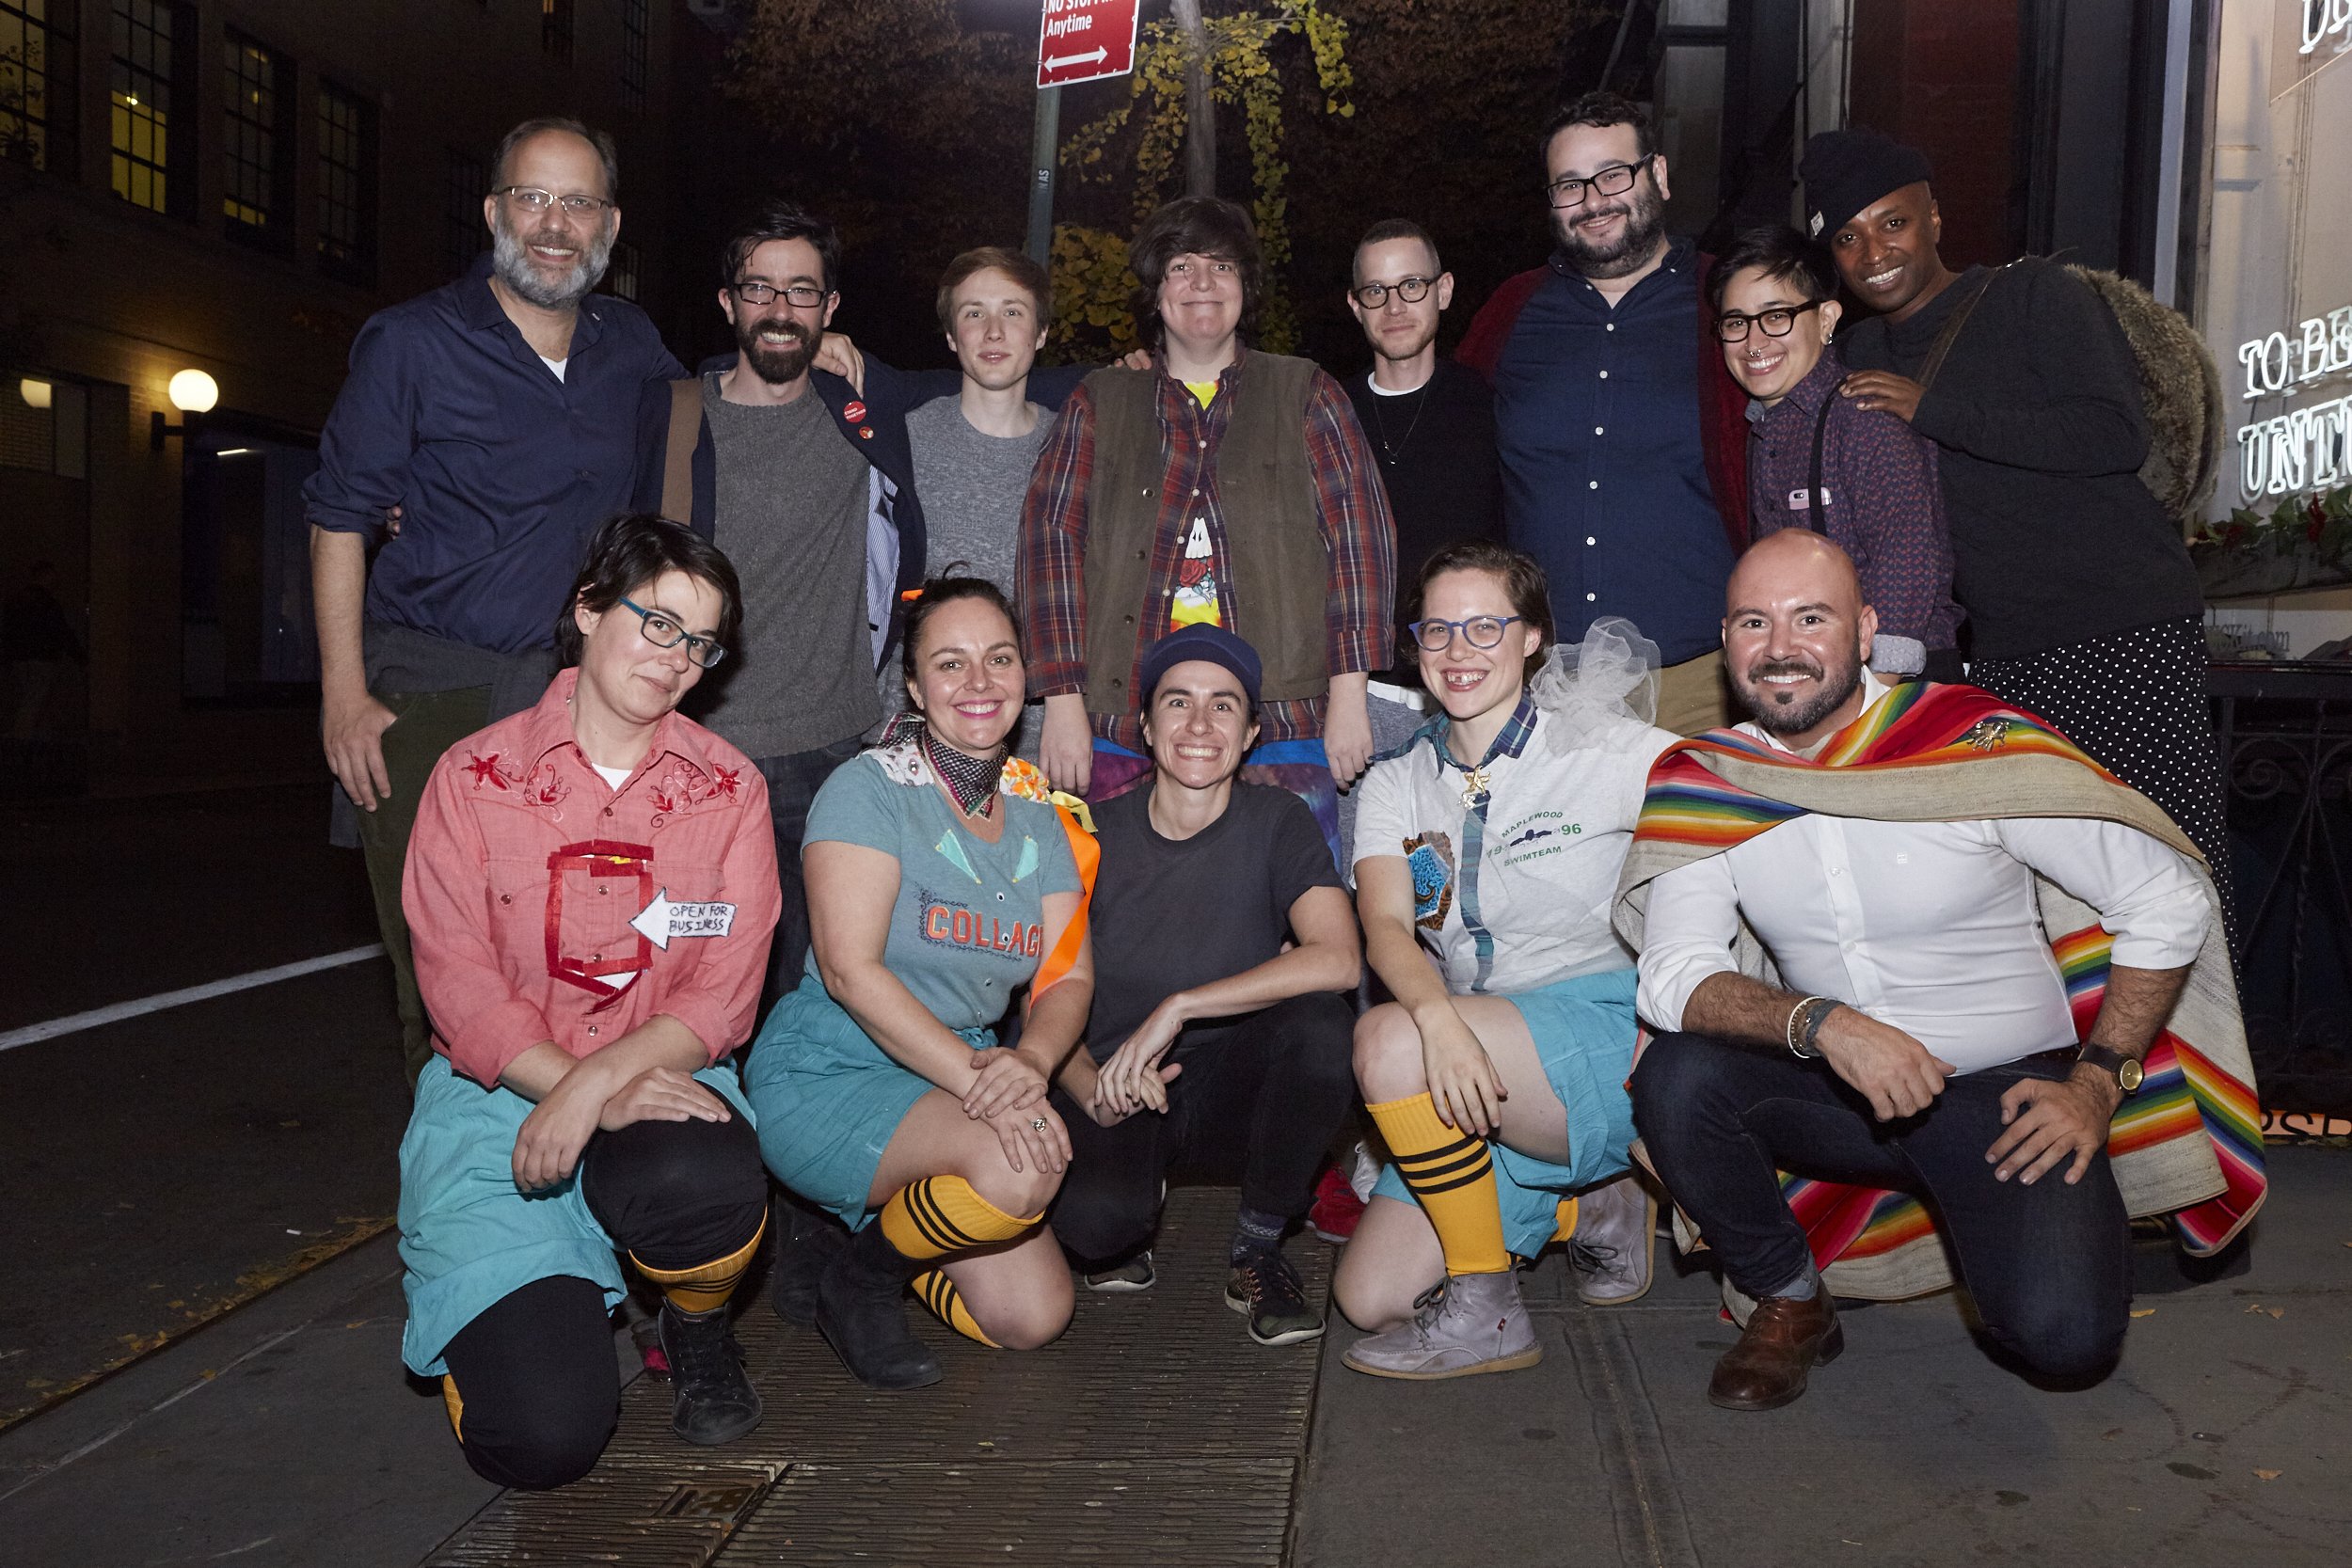 Copy of Queer_Art_Mentorship 2015-2016 Fellows with Queer_Art Executive Director, Ira Sachs and Program Coordinator, Vanessa Haroutunian at the Queer_Art_Mentorship 2015-2016 Annual Exhibition (Photo by Eric McNatt)_1.jpg